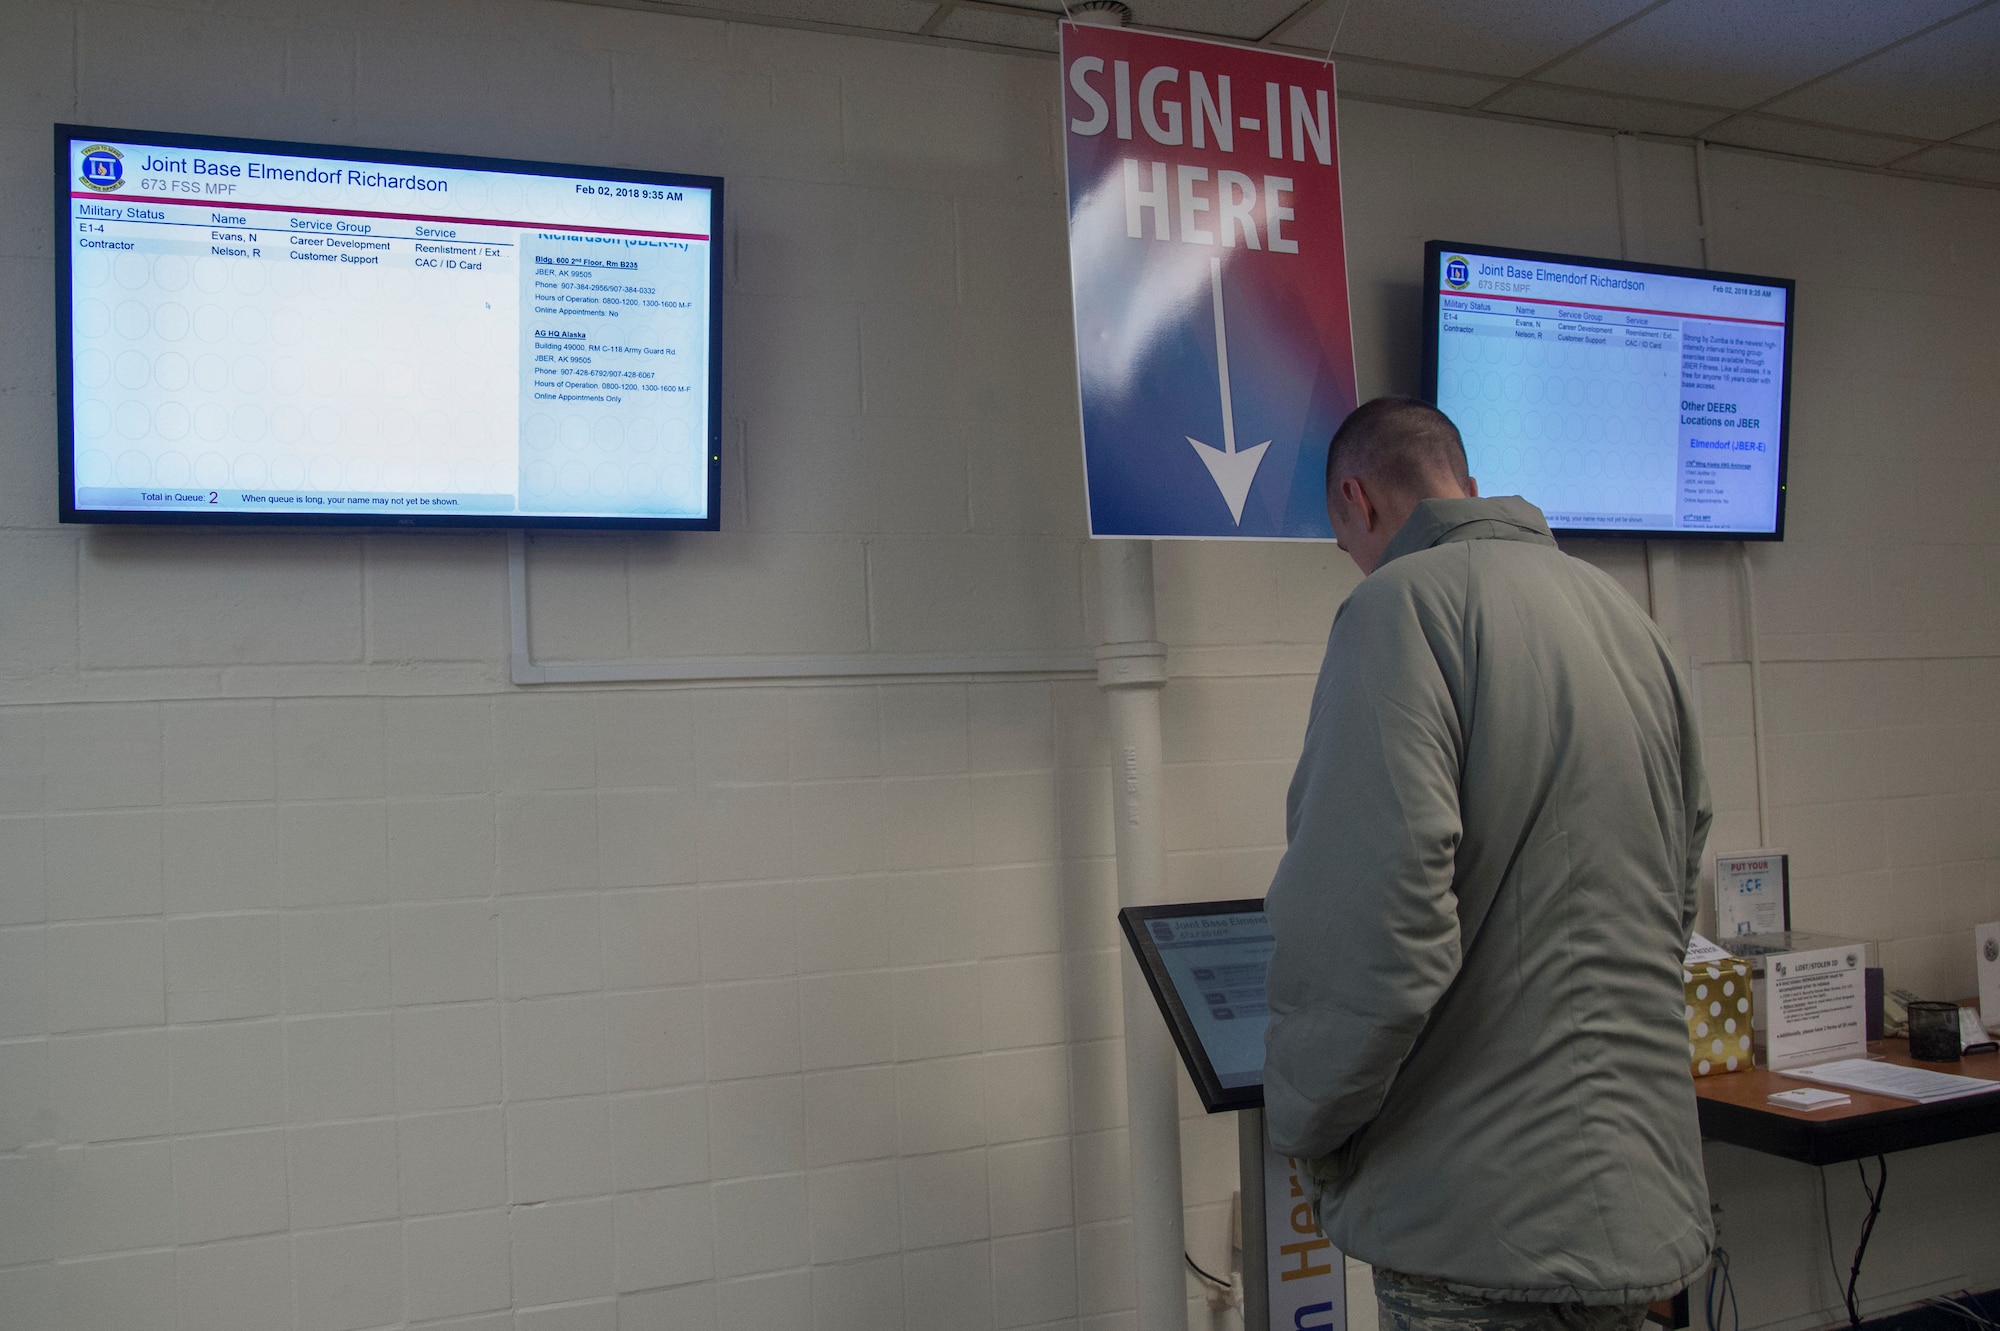 Tech. Sgt. Michael Thomas checks in at the kiosk at the Military Personnel Section lobby at Joint Base Elmendorf-Richardson, Alaska, Feb. 2, 2018. The MPS check-in kiosk has recently added several updates, including a new online sign-in feature.